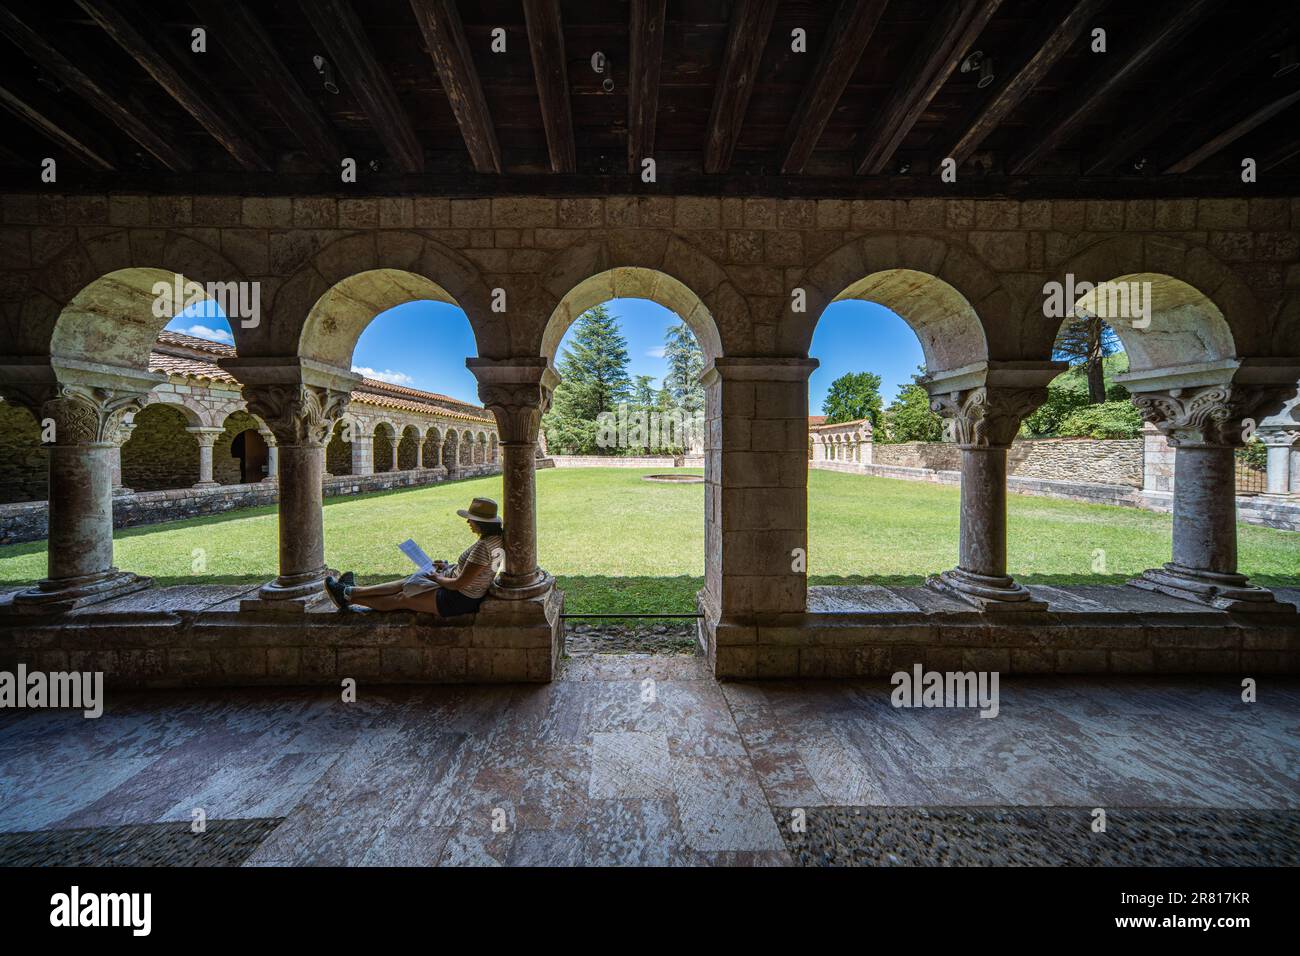 A woman reading in the cloister of the Abbey of Saint-Michel de Cuxa, France Stock Photo